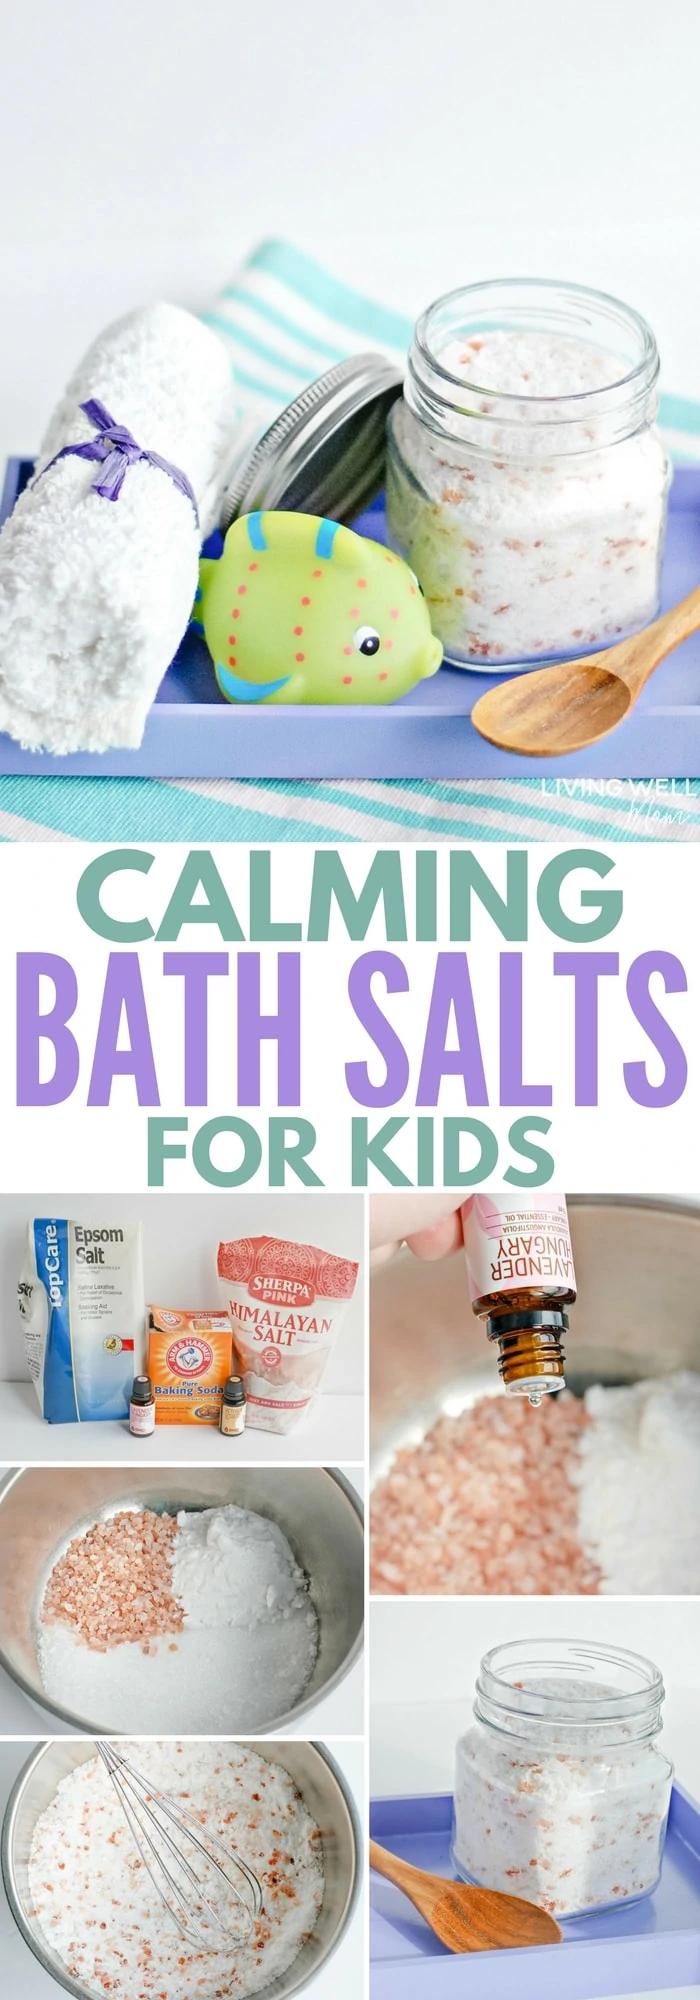 How to make calming bath salts for kids